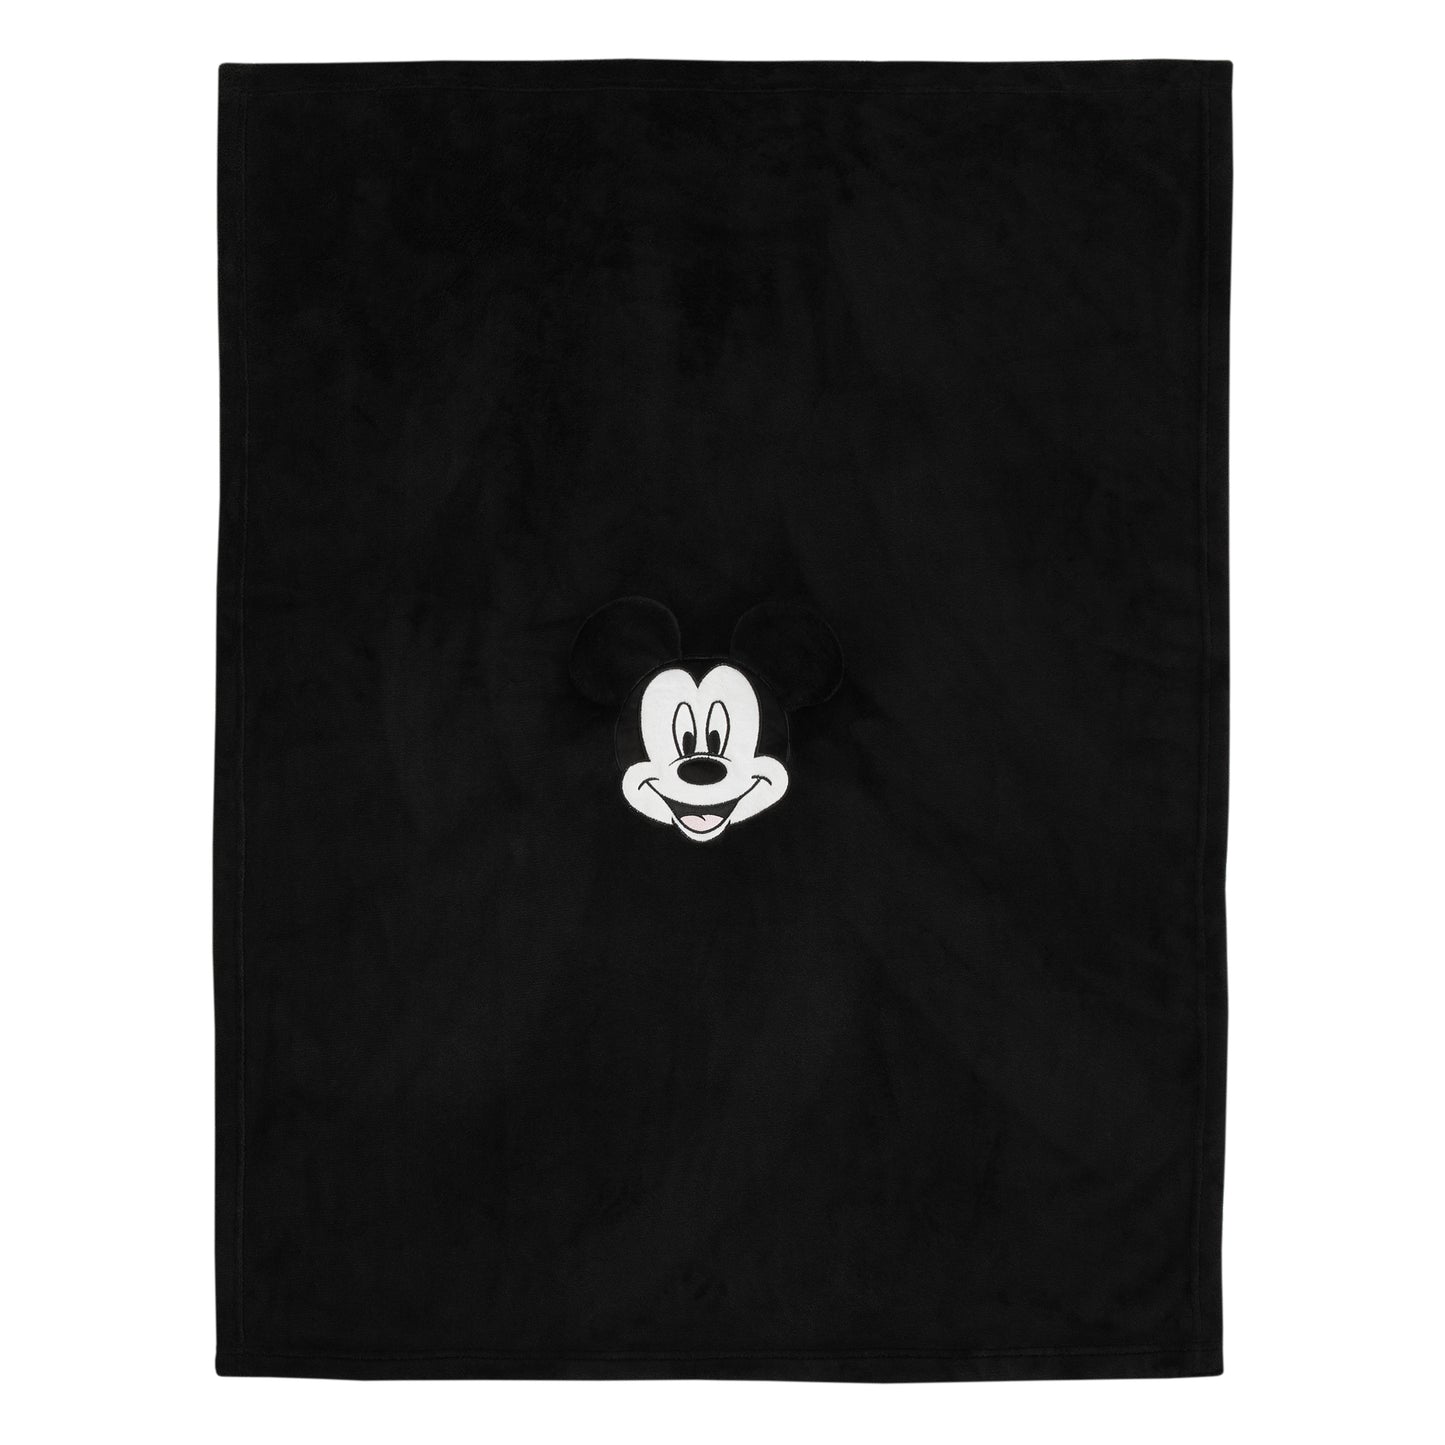 Disney Mickey Mouse Funhouse Crew Black and Red Super Soft Plush Character Toddler Blanket